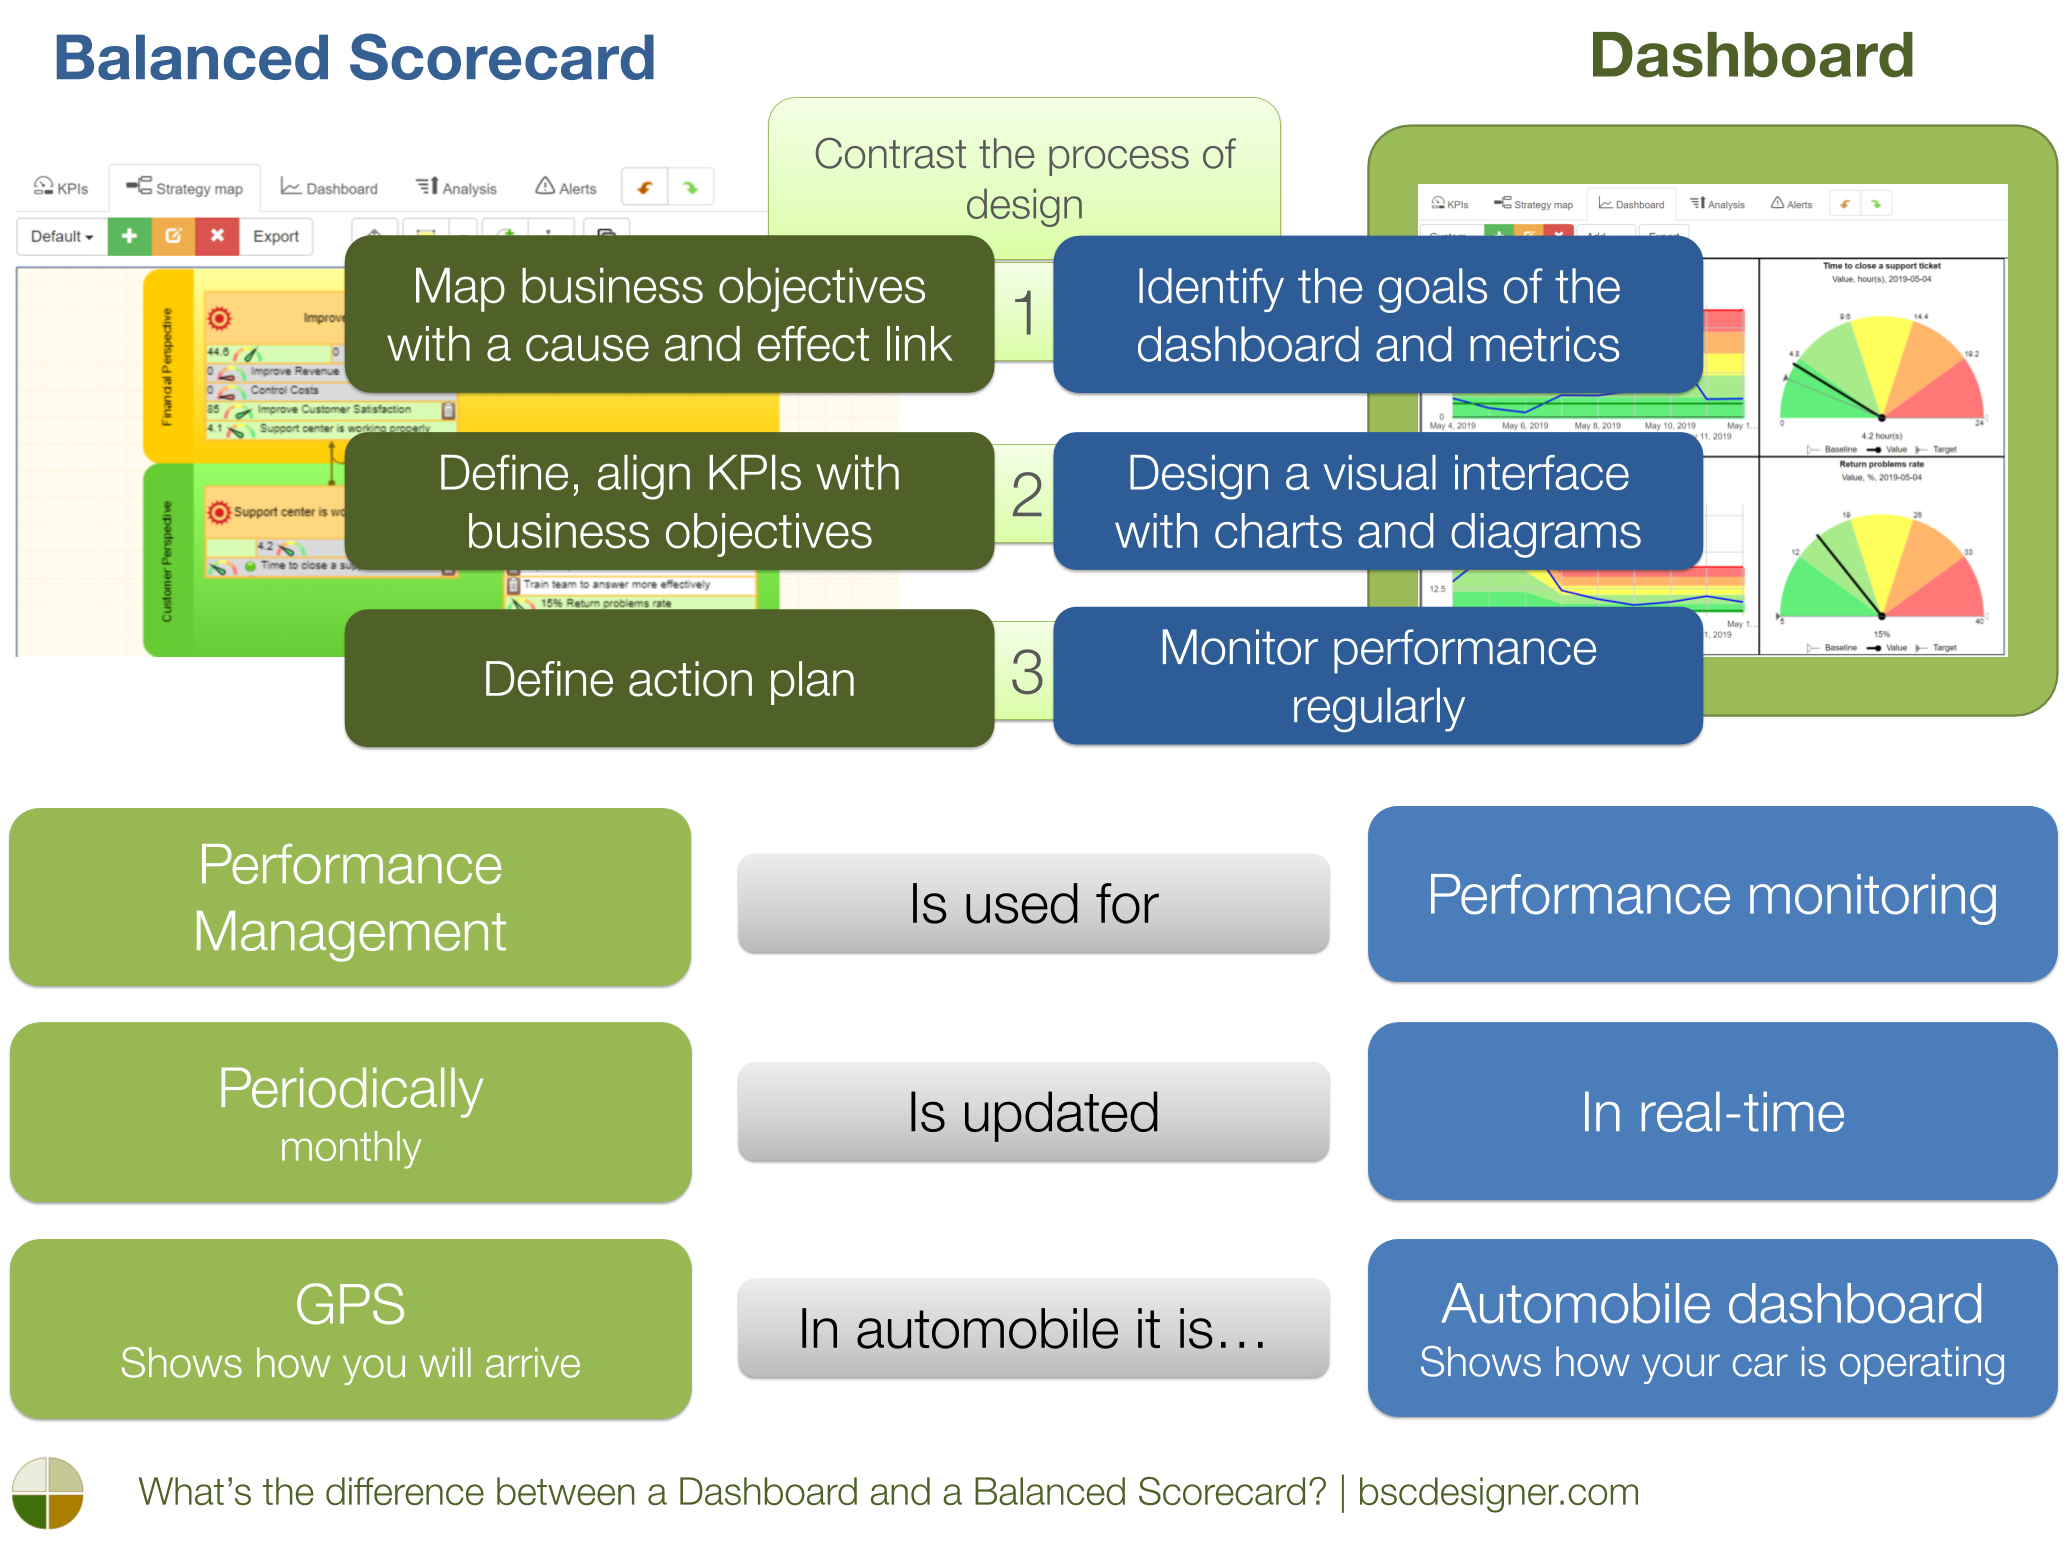 What’s the difference between a Dashboard and a Balanced Scorecard?